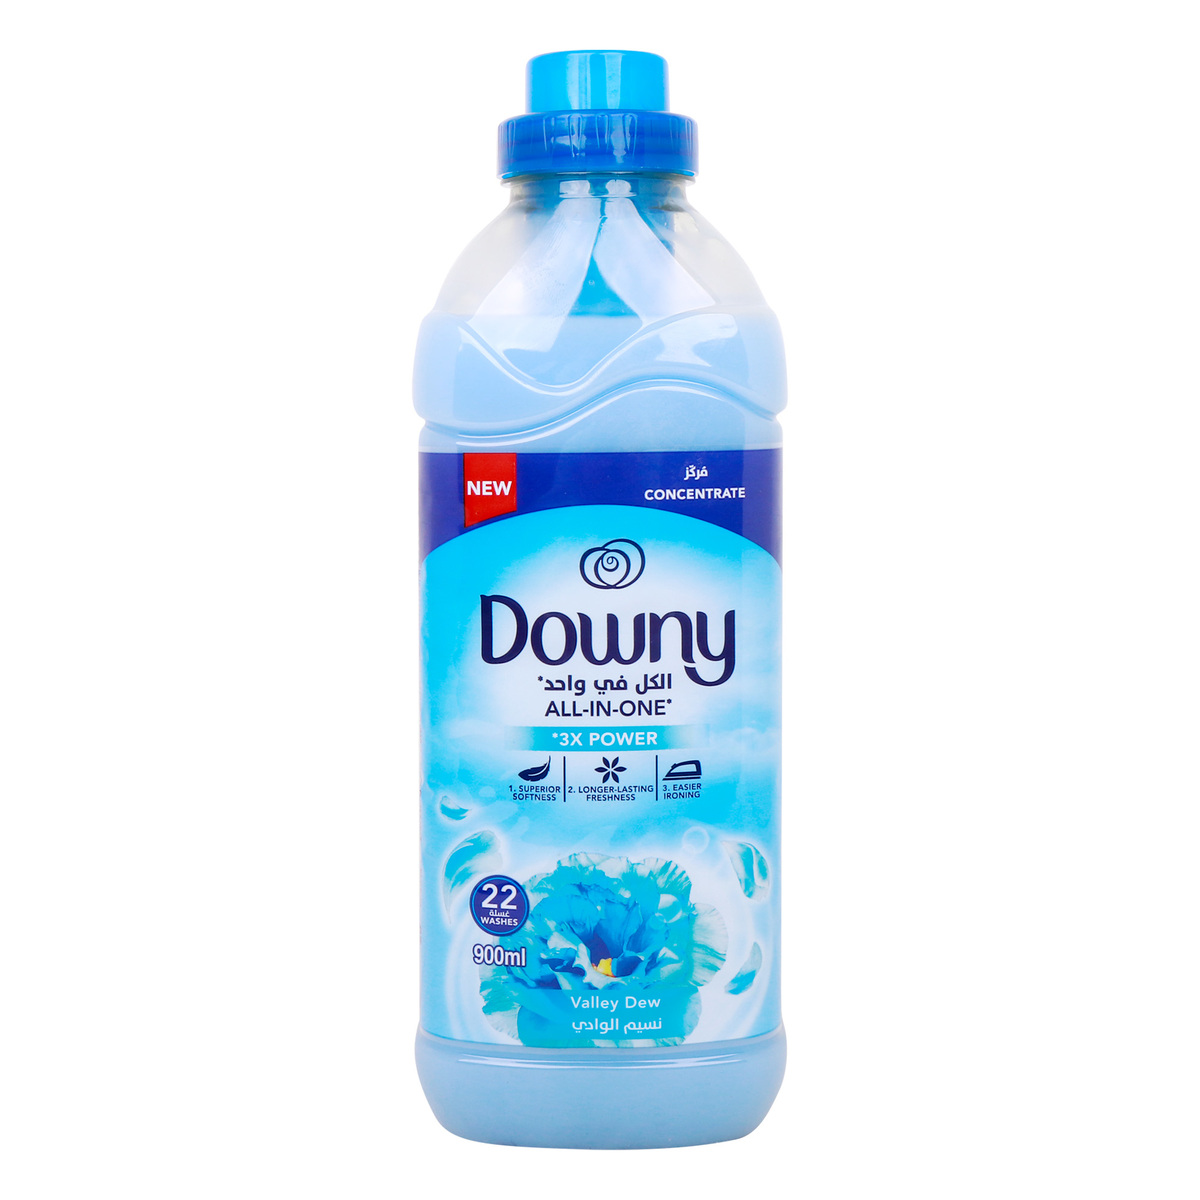 Downy Fabric Softener Concentrated Valley Dew, 900 ml